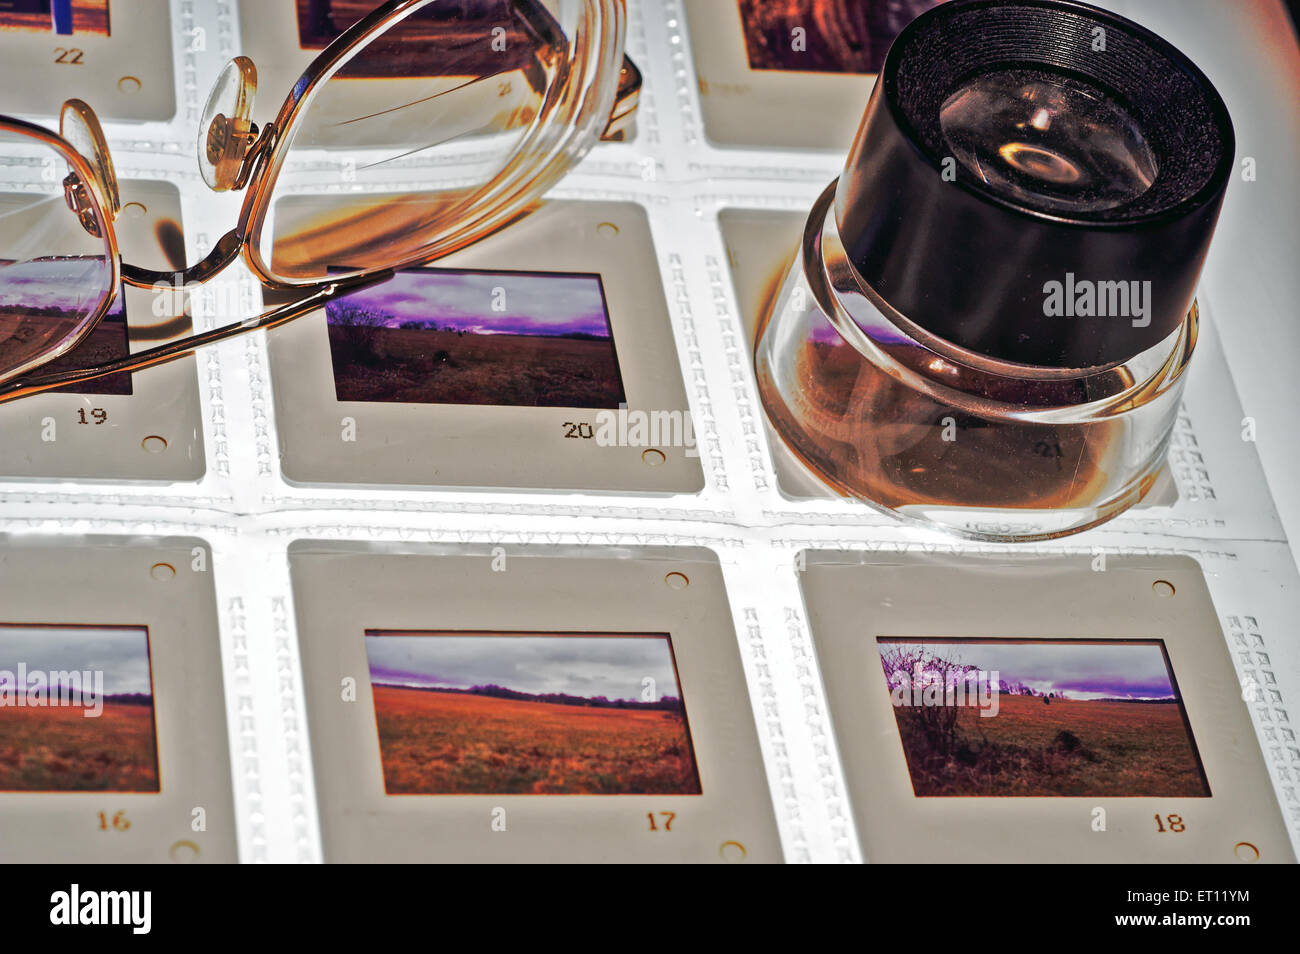 Slides (Transparencies) on a Light Box with Magnifying Loupe and Eyeglasses-Close up. Stock Photo